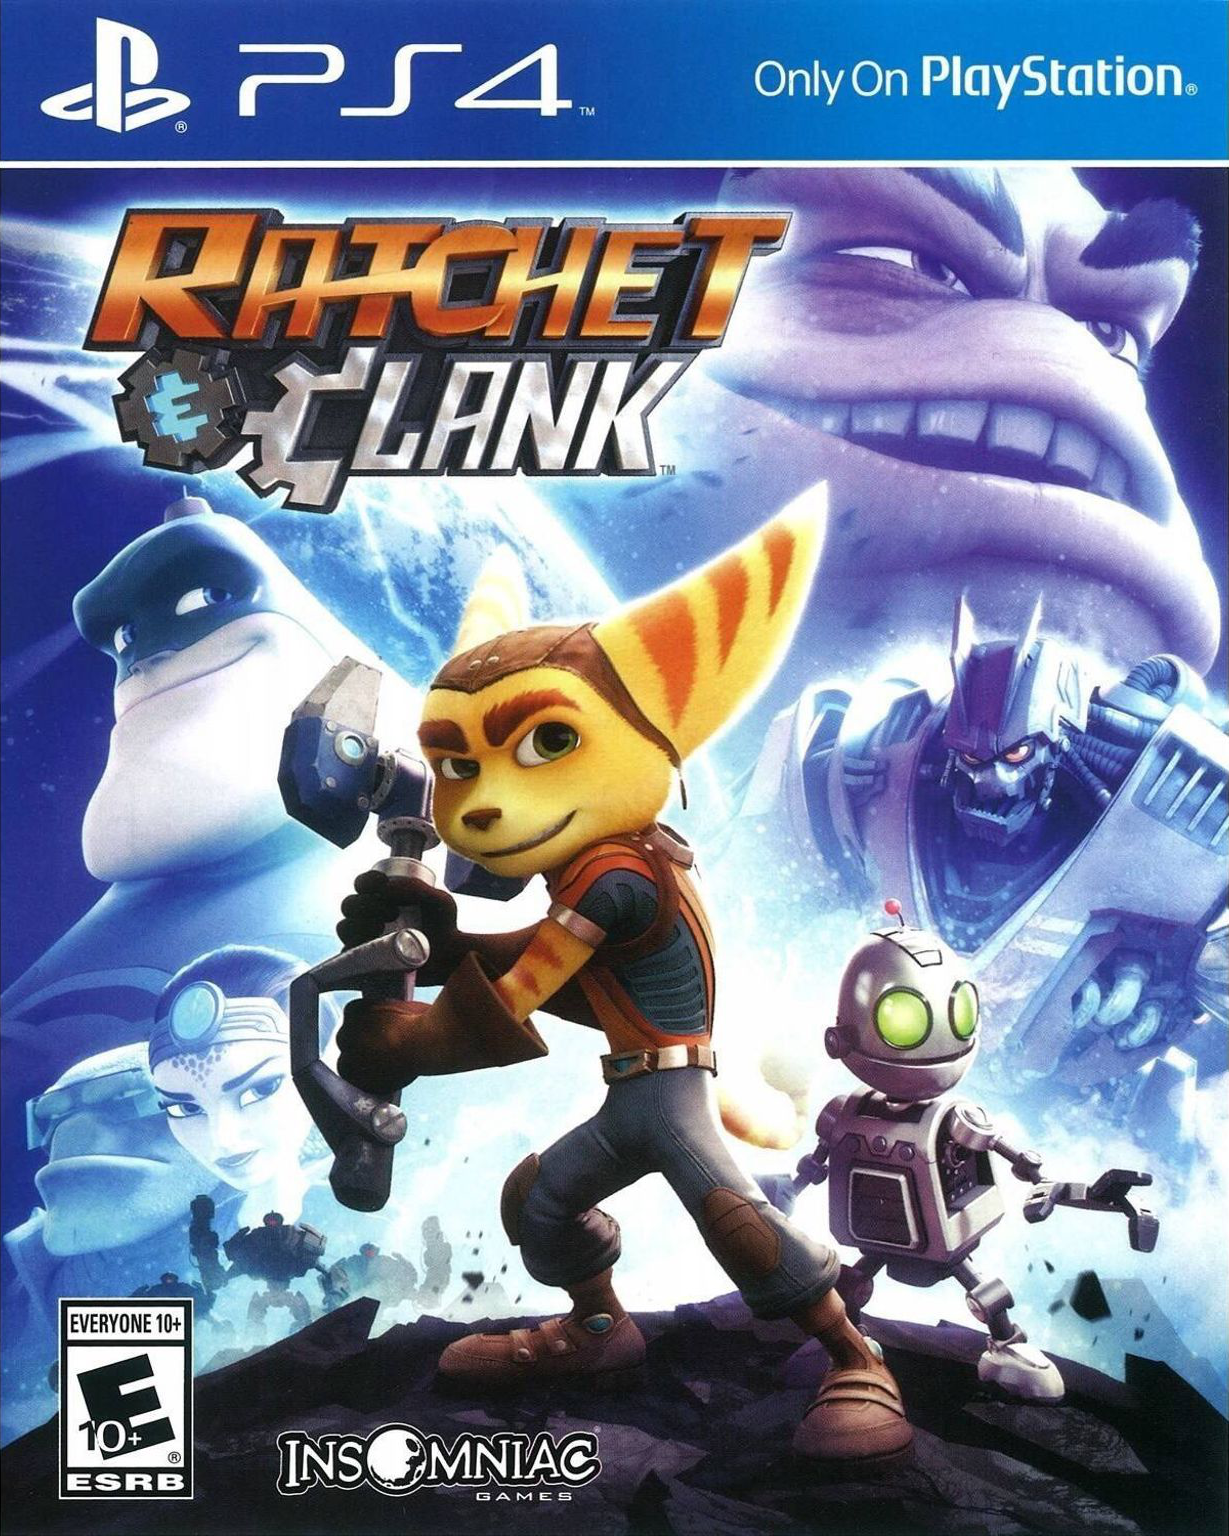 ratchet and clank 2016 movie